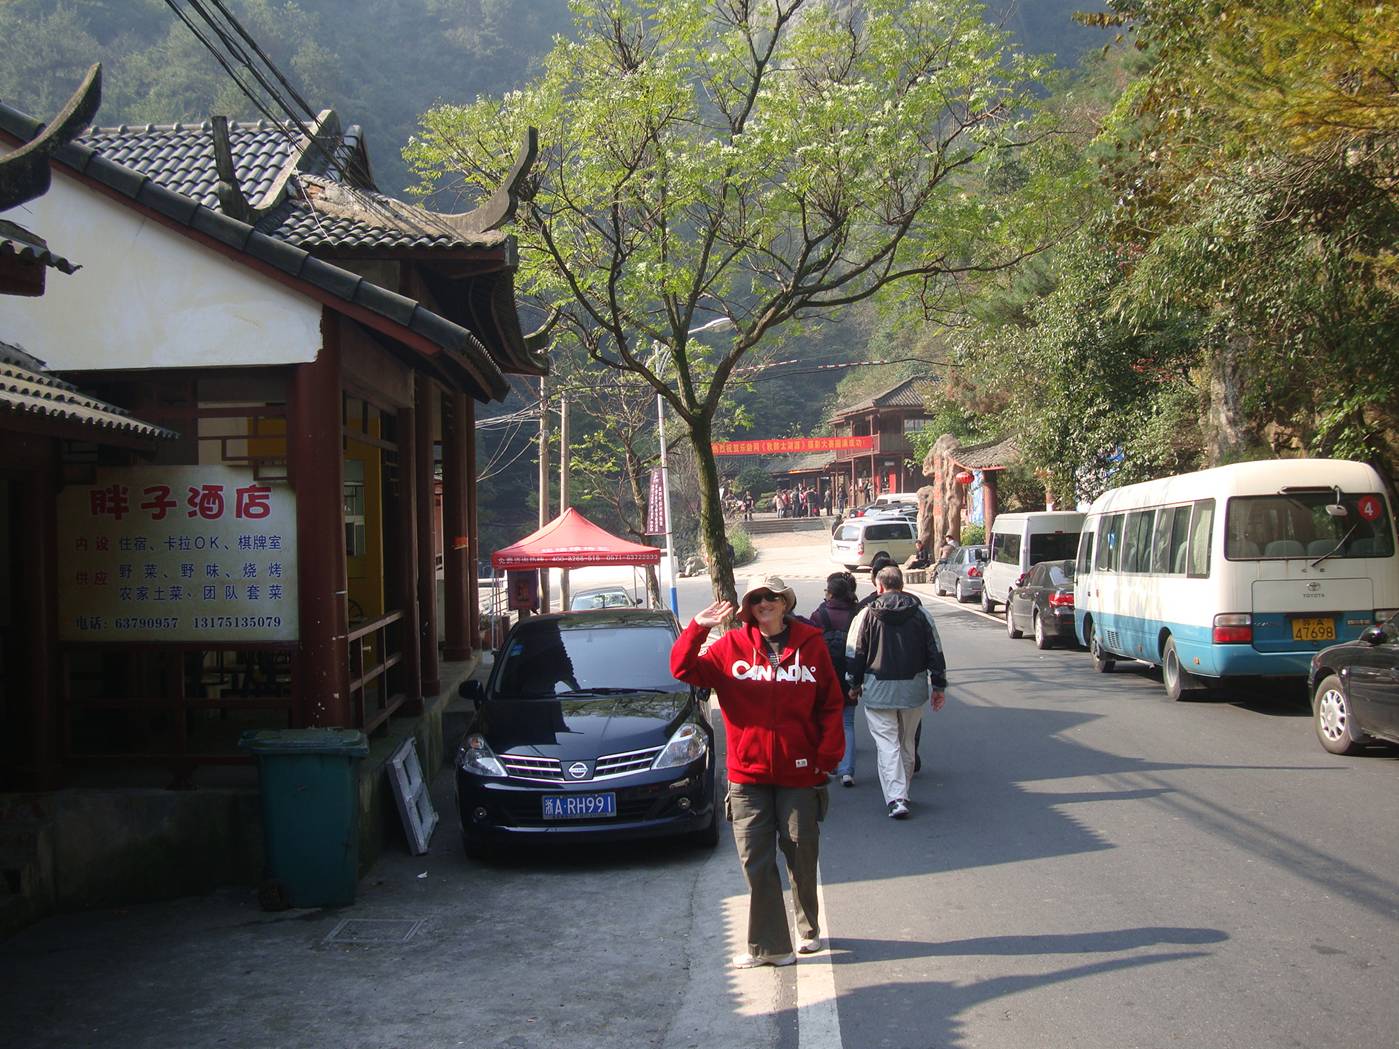 Picture:  Ruth in the sweatshirt my sister Susan gave her back home, standing on a street  in Zhejiang Province, China